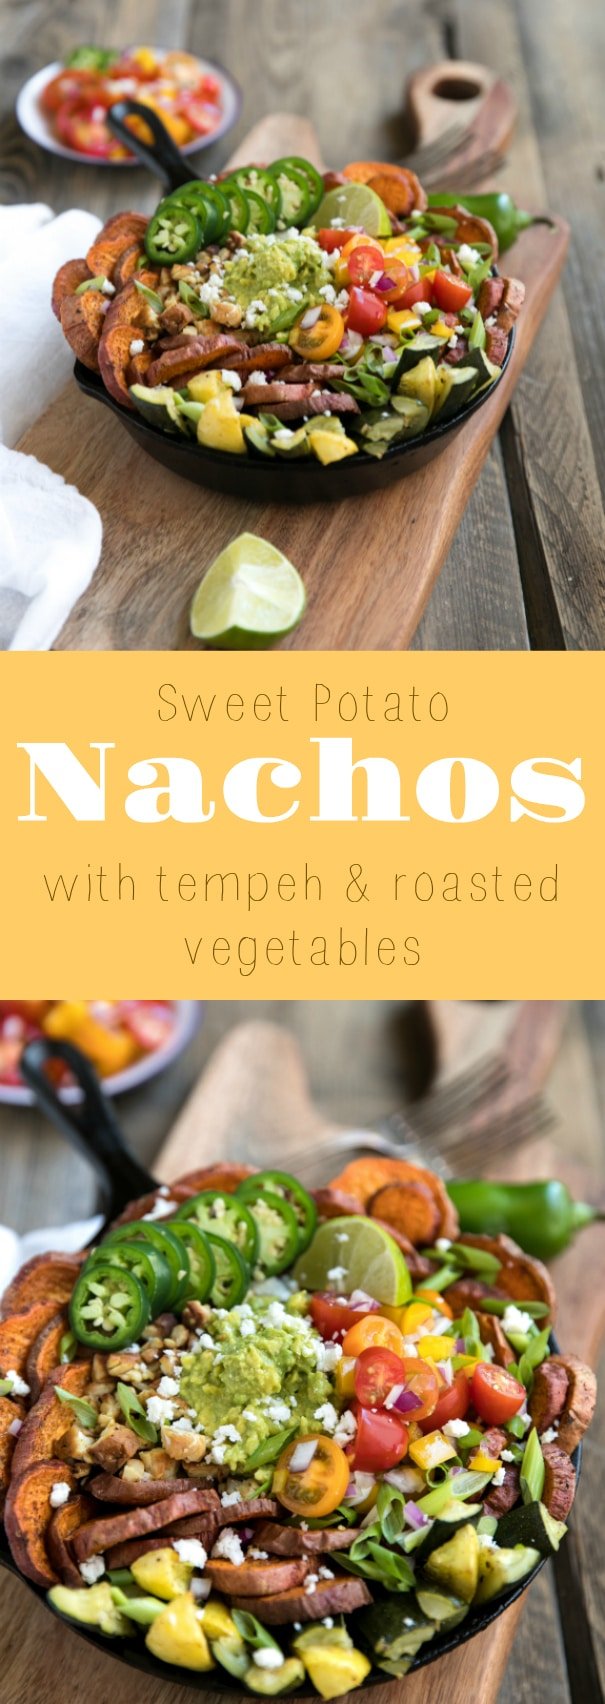 Sweet Potato Nachos with Tempeh and Roasted Vegetables